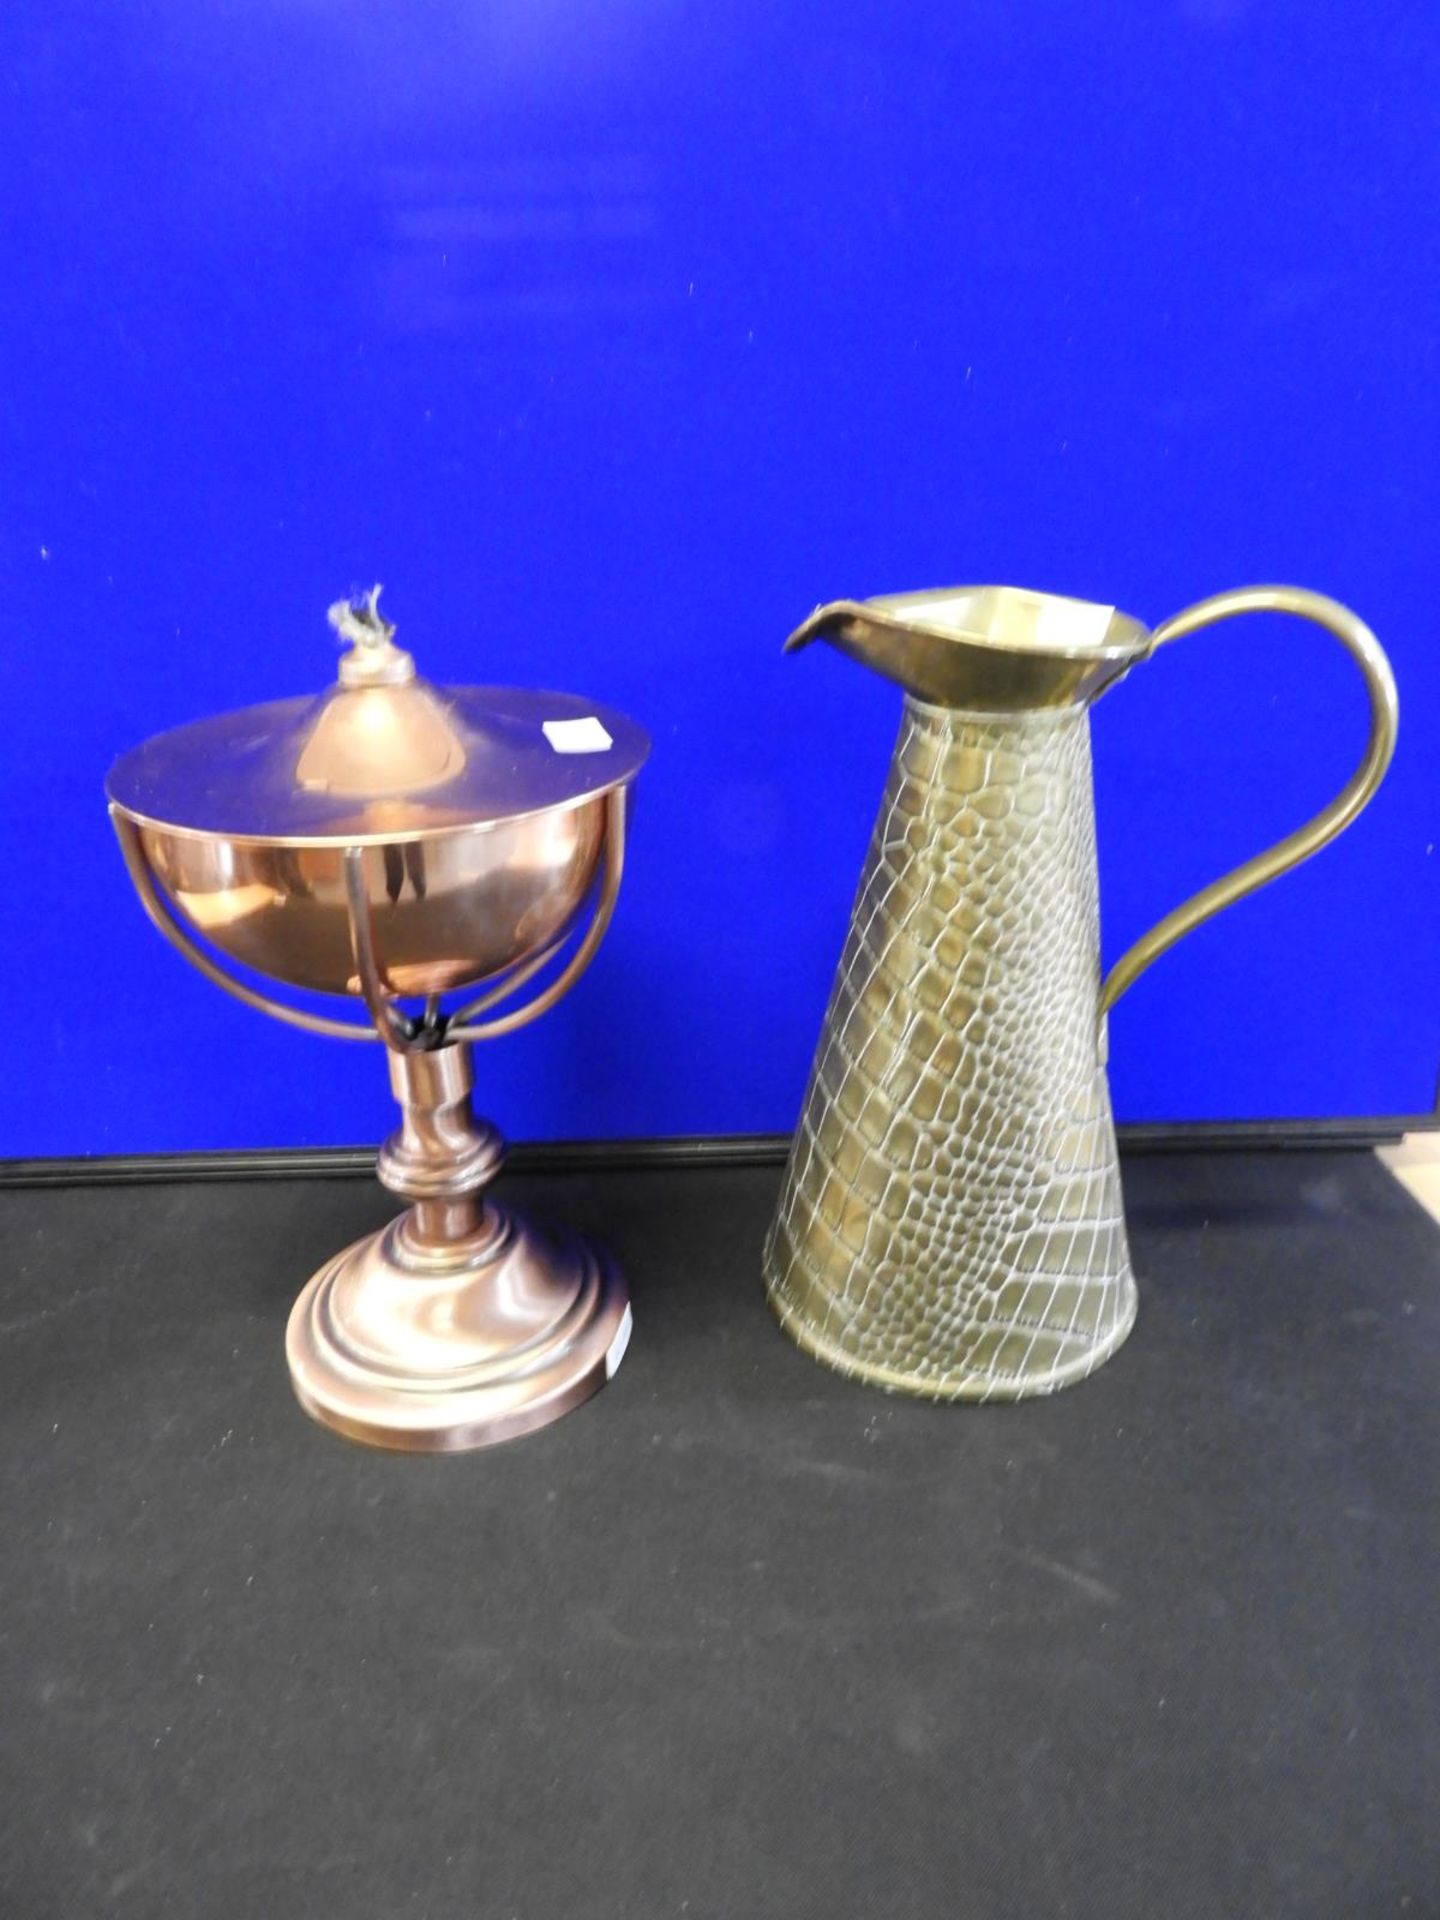 Outdoor Copper Tabletop Burner and a Brass Jug